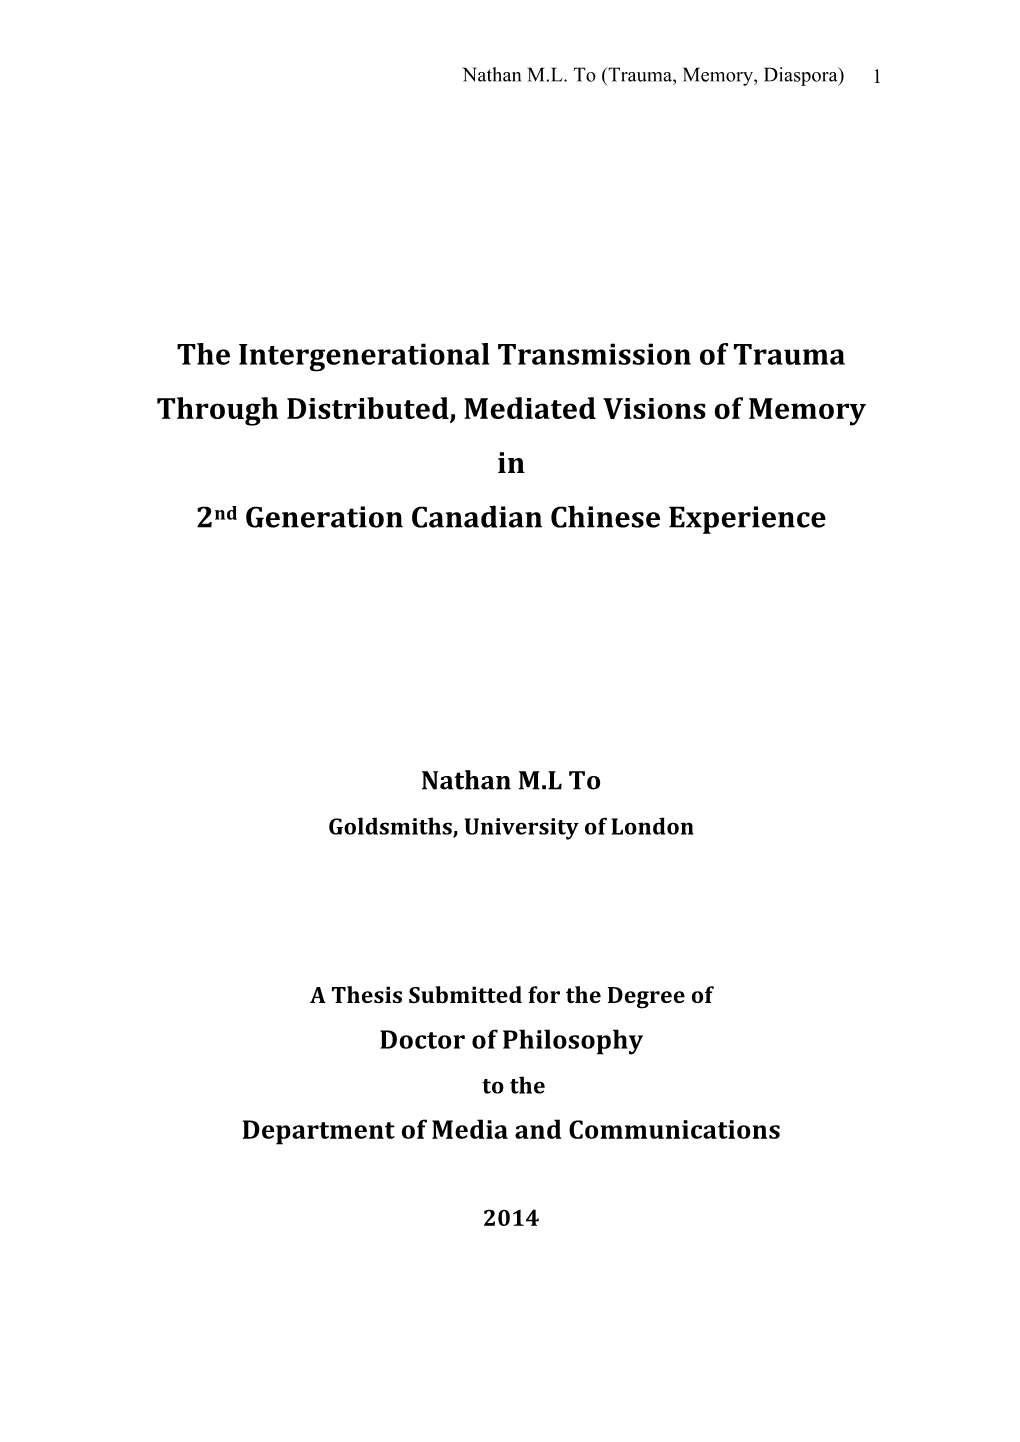 The Intergenerational Transmission of Trauma Through Distributed, Mediated Visions of Memory in 2Nd Generation Canadian Chinese Experience